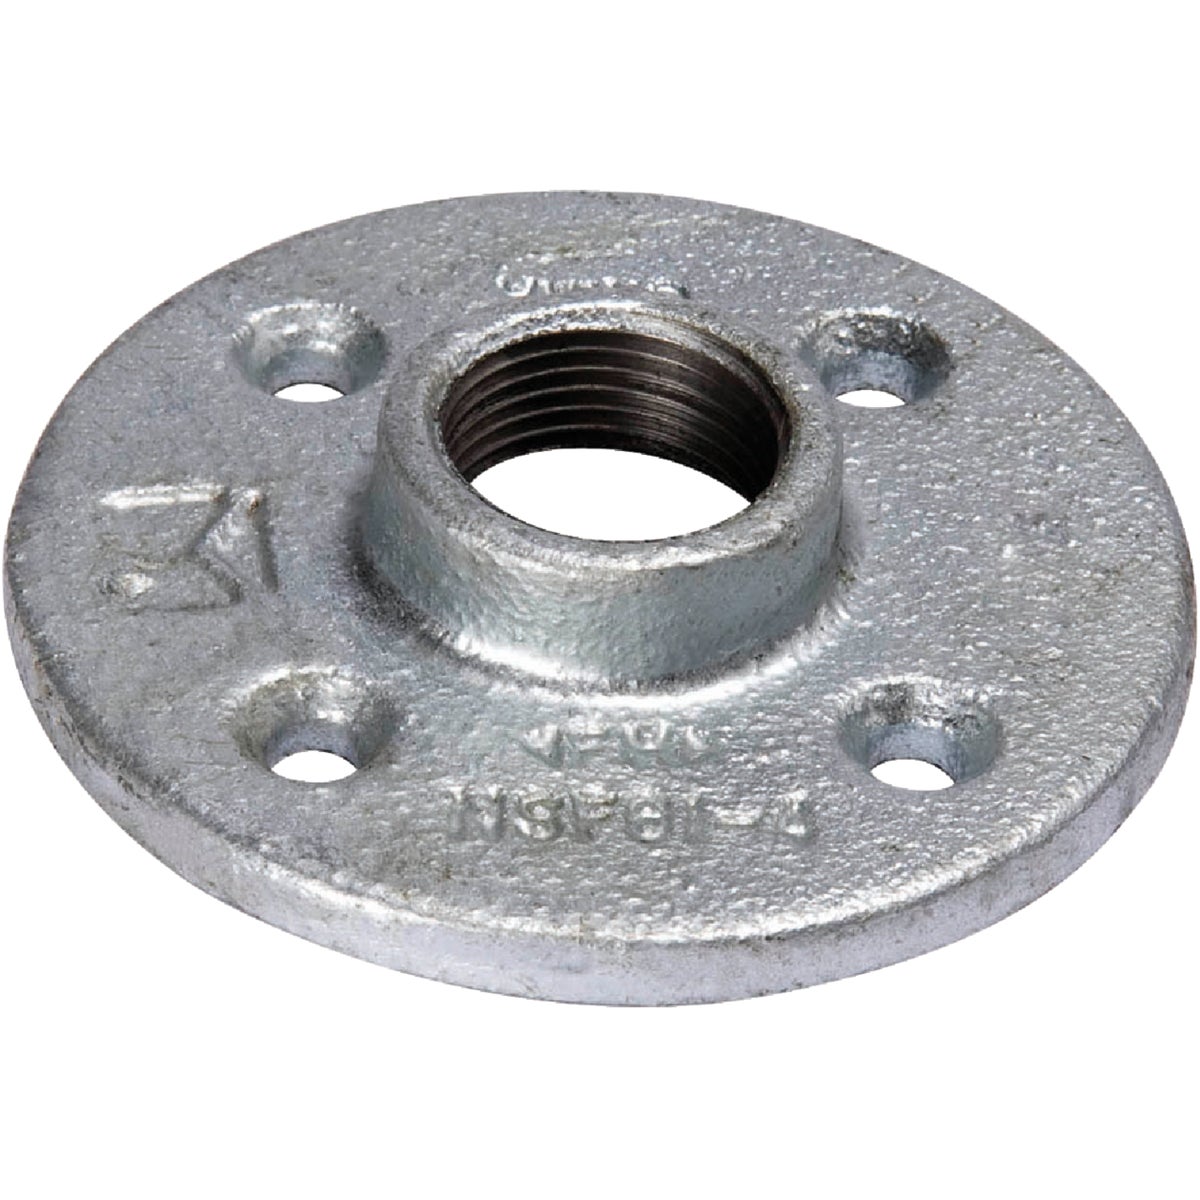 Southland 1 In. Malleable Iron Galvanized Floor Flange